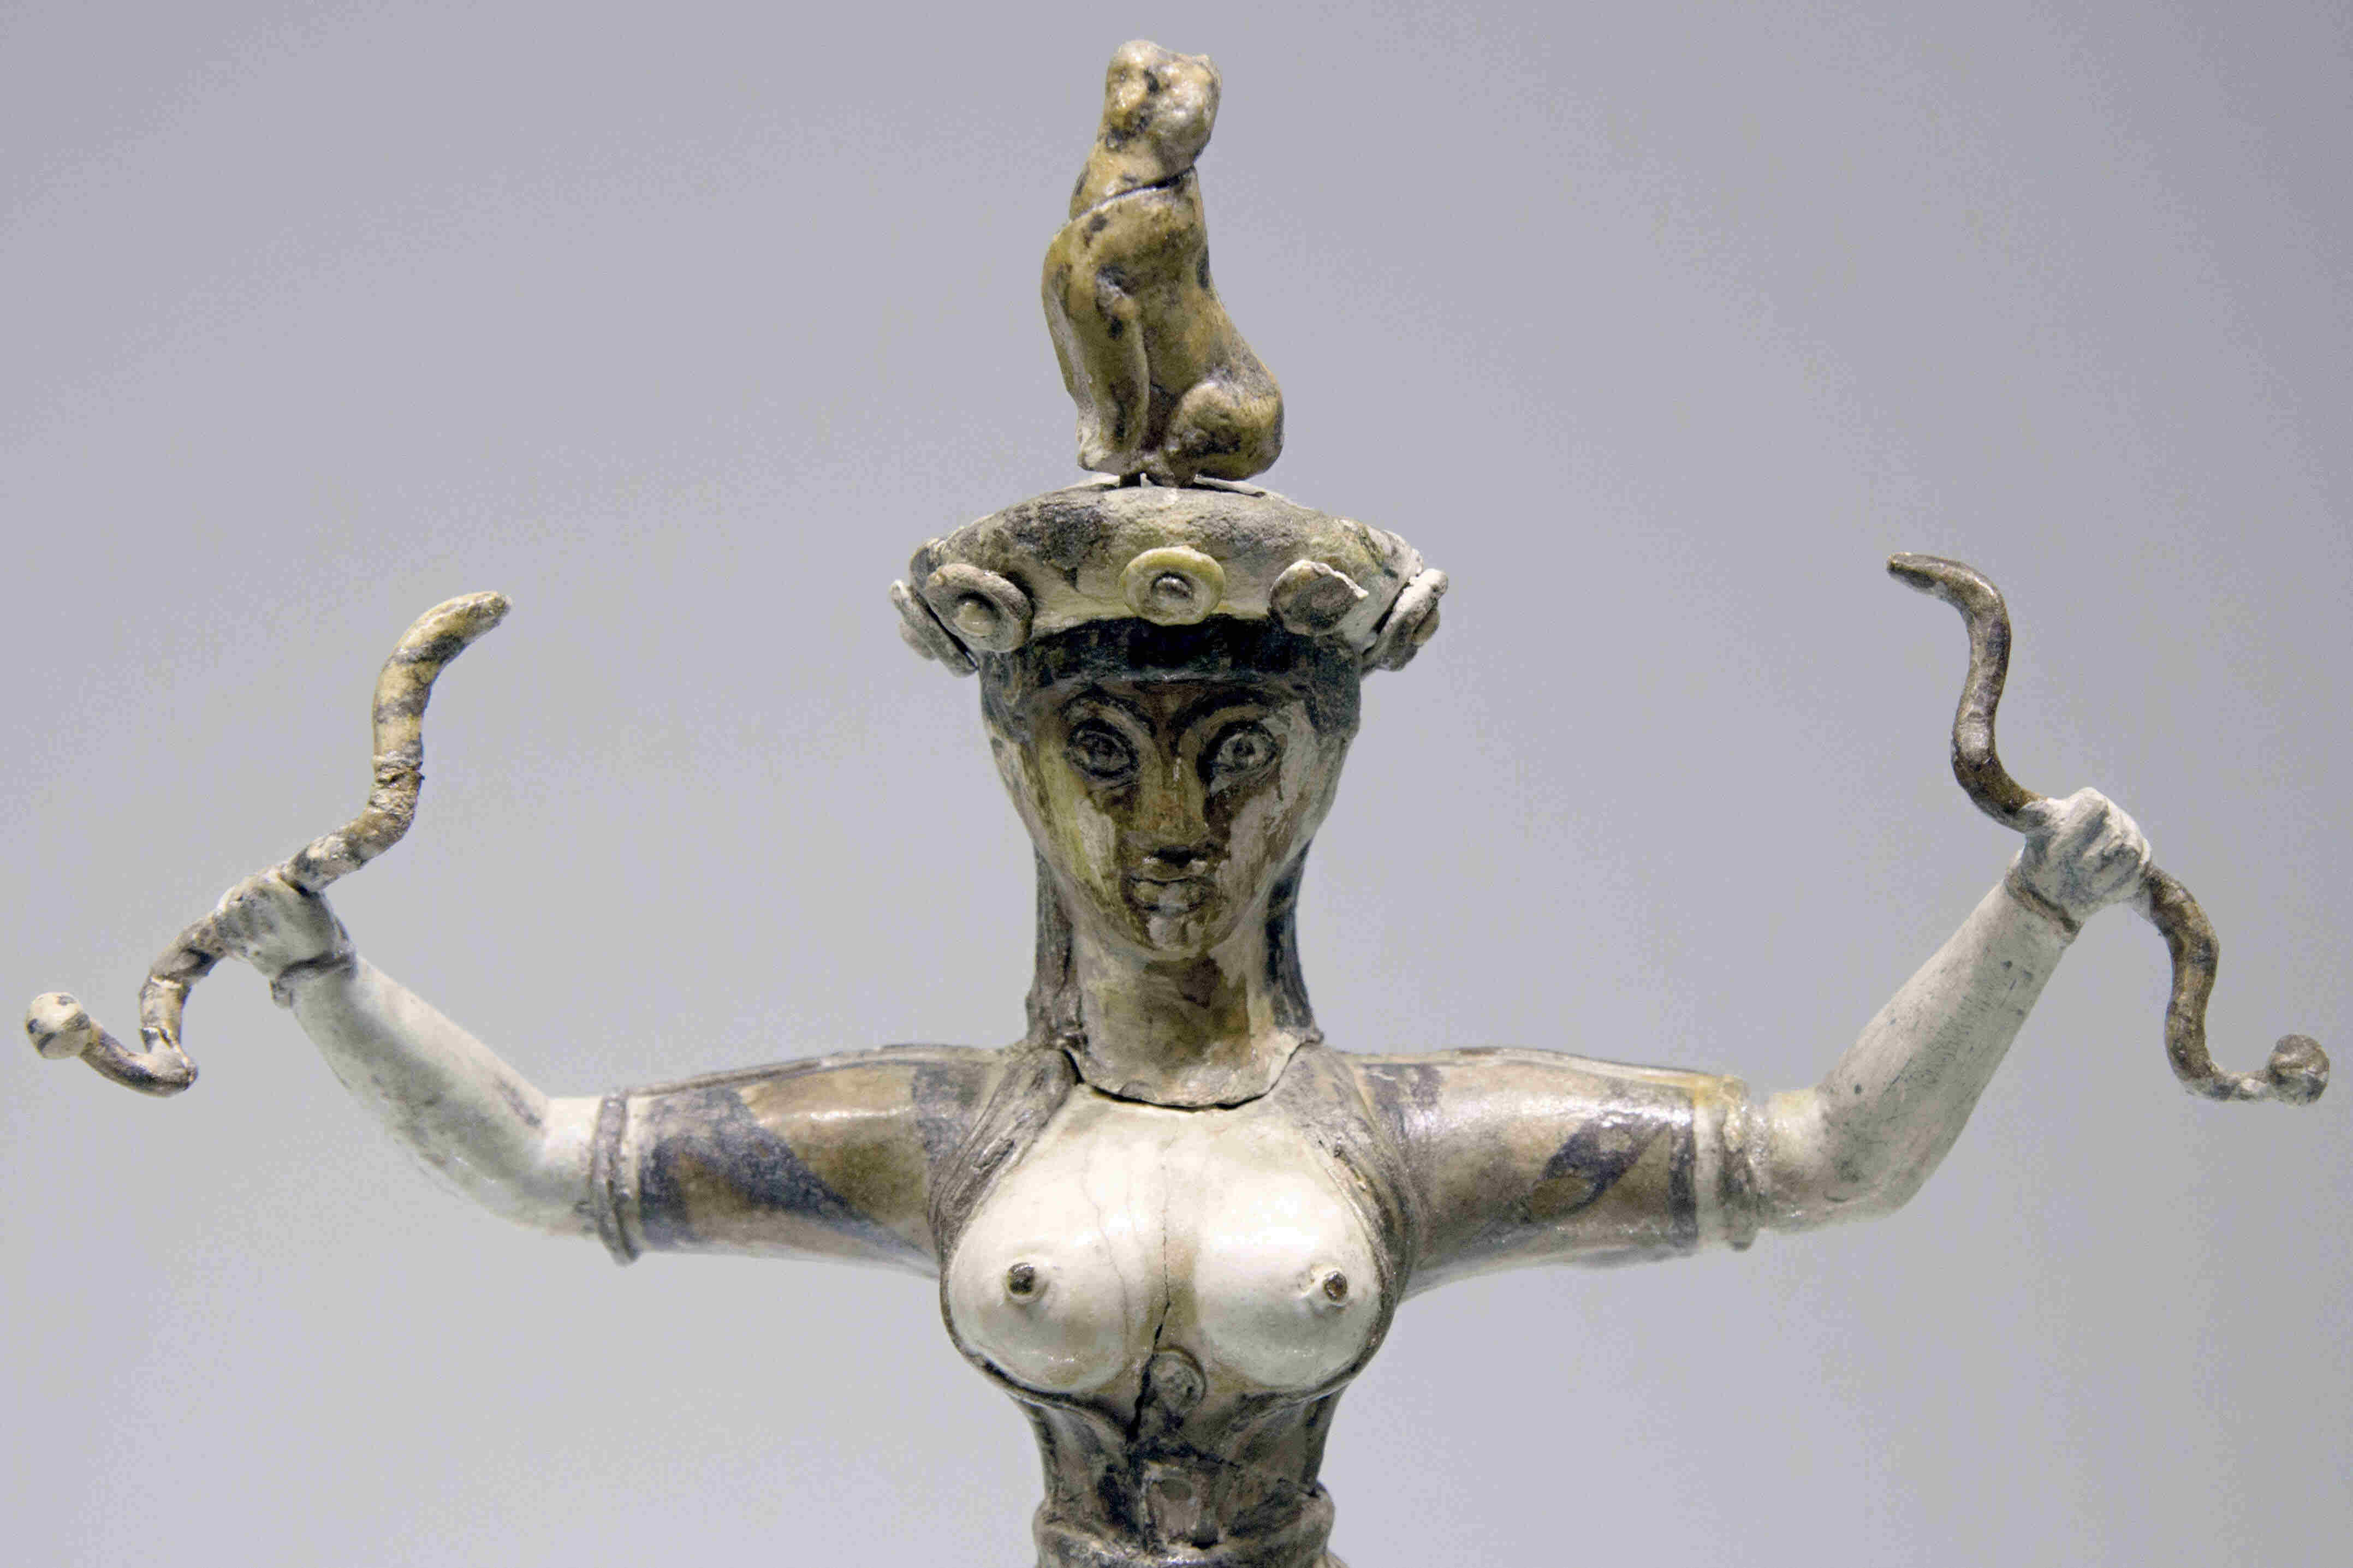 The Snake Goddess Sculpture Belongs To Which Culture?